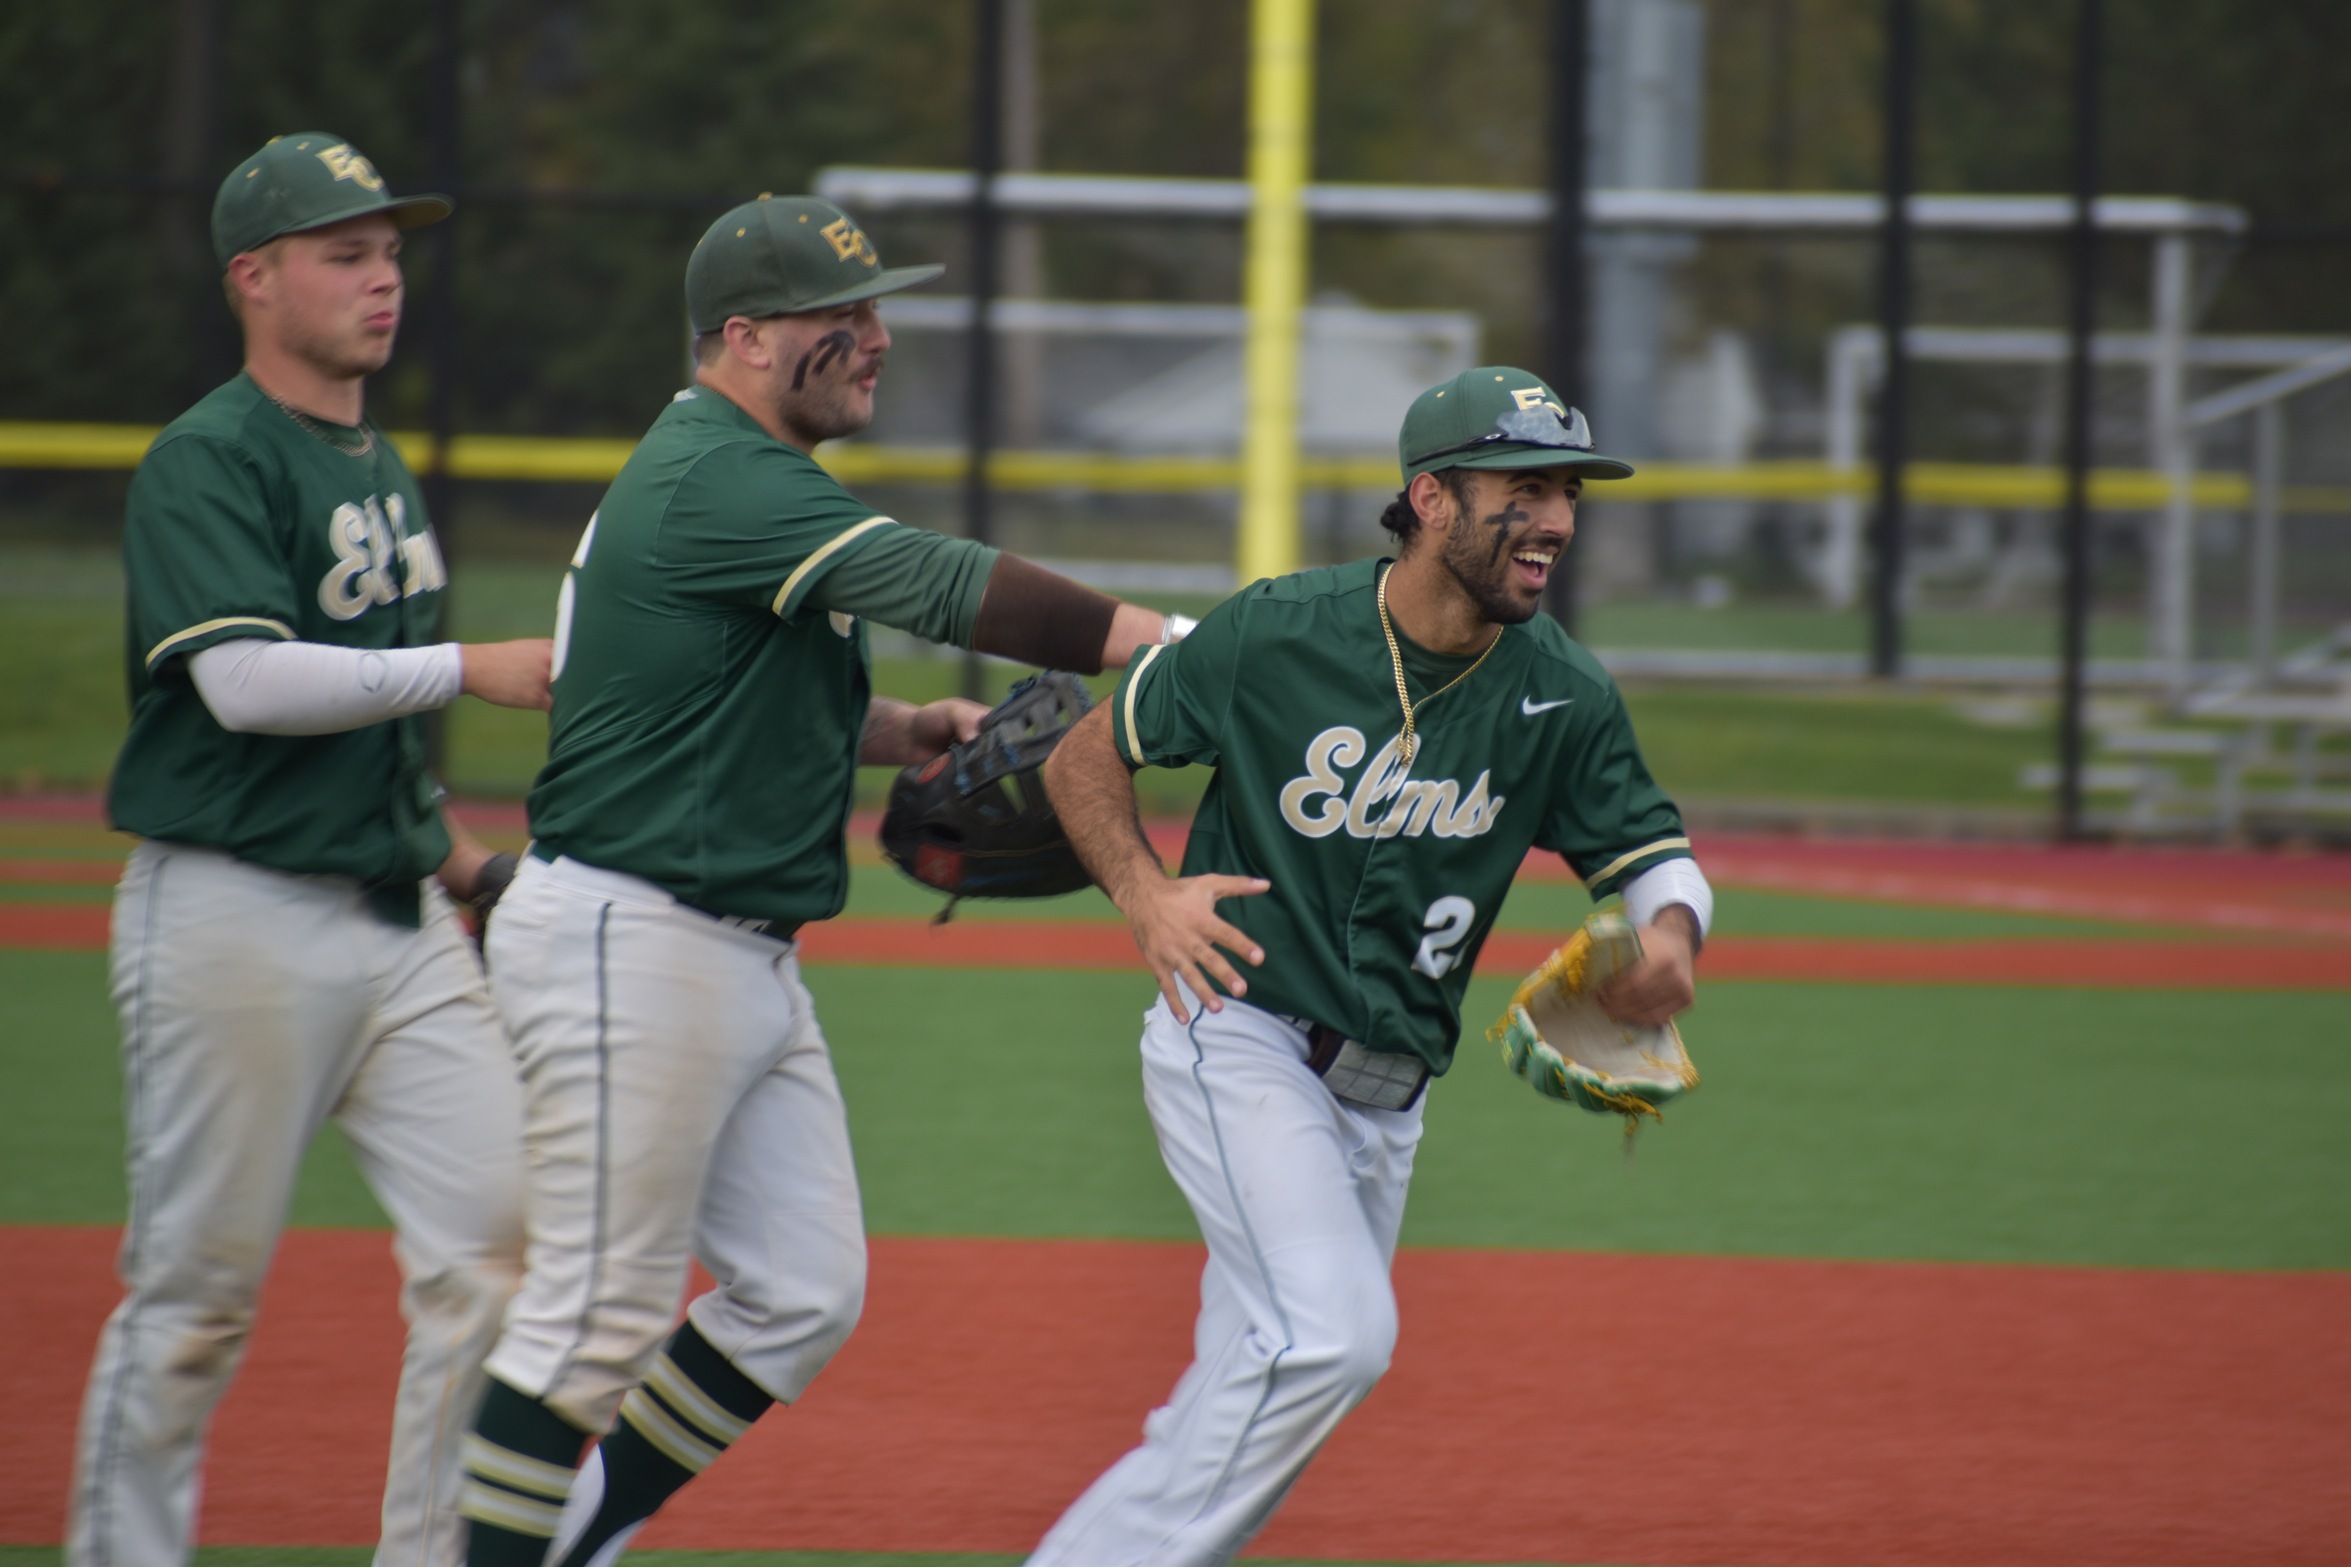 Sebastyanski Strikes Out Four Batters in 4-1 Victory Over Monks